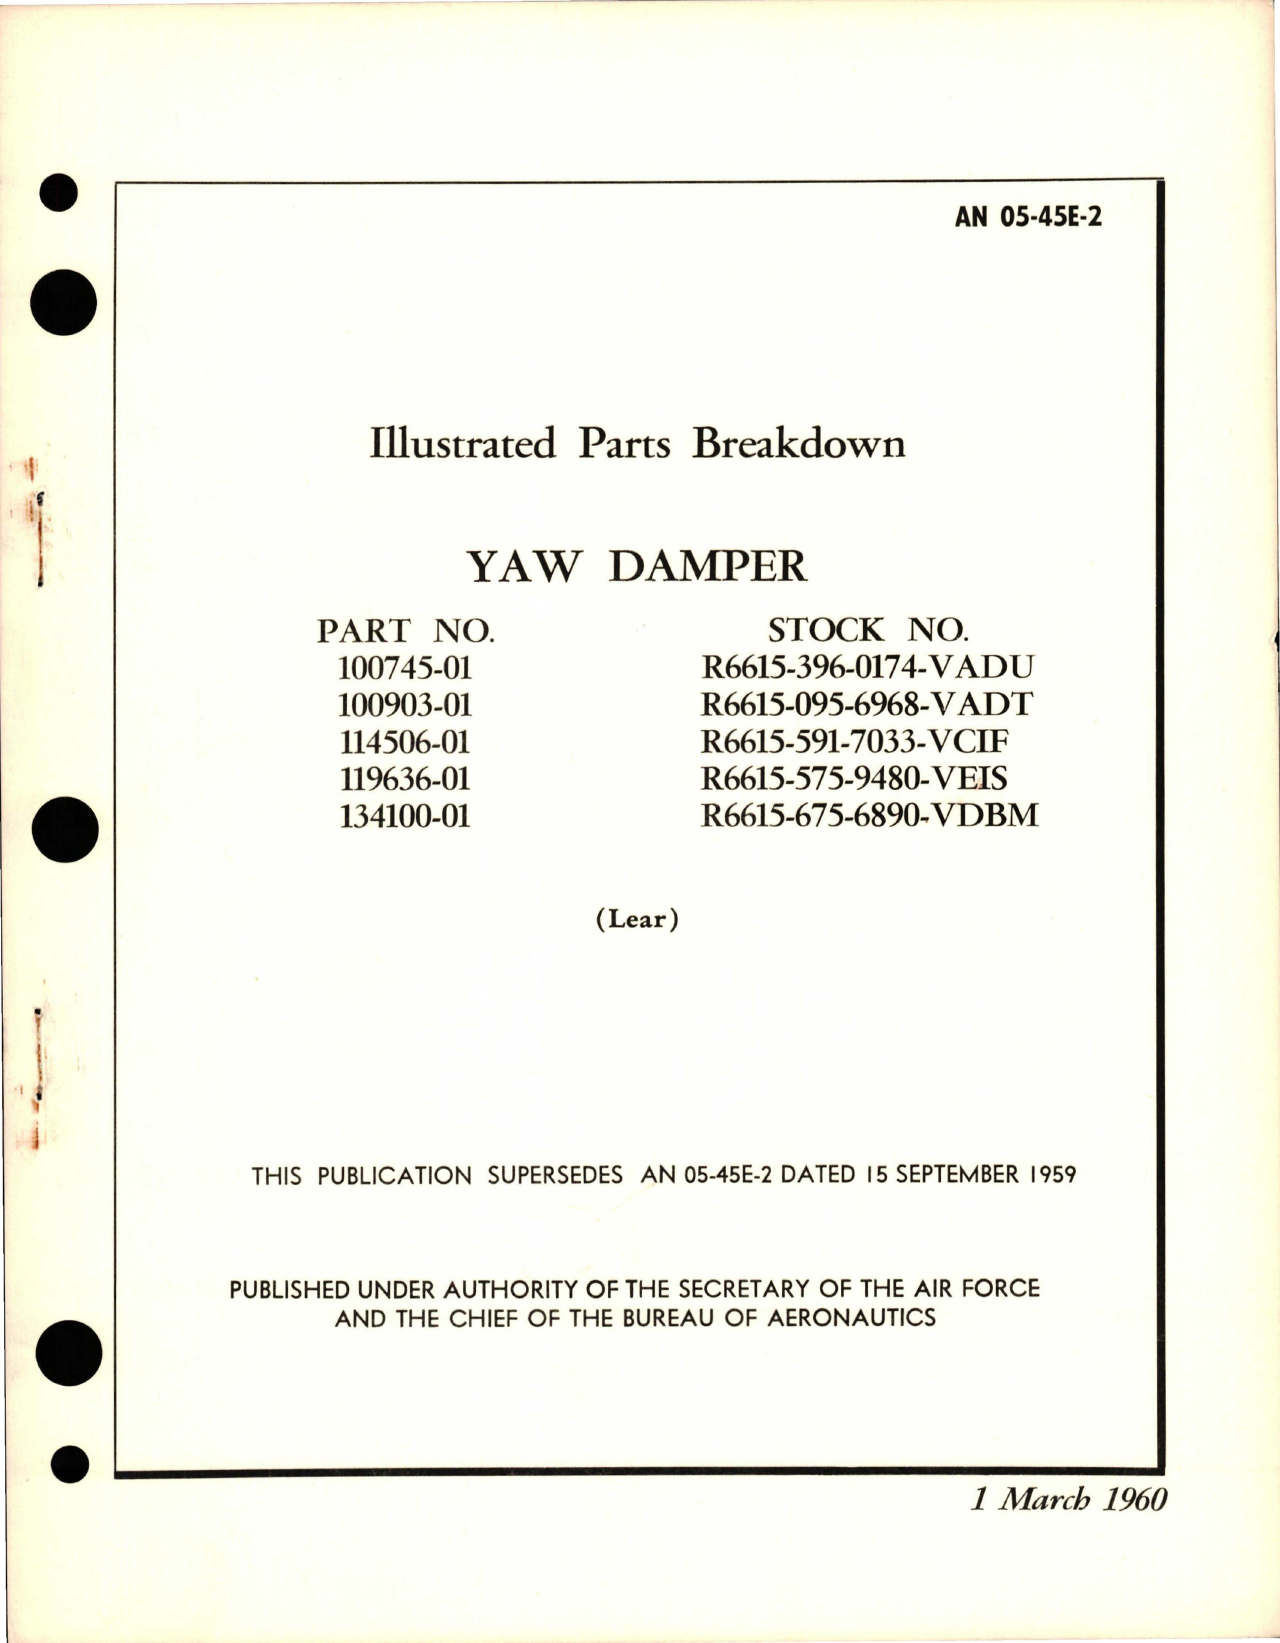 Sample page 1 from AirCorps Library document: Illustrated Parts Breakdown for Yaw Damper